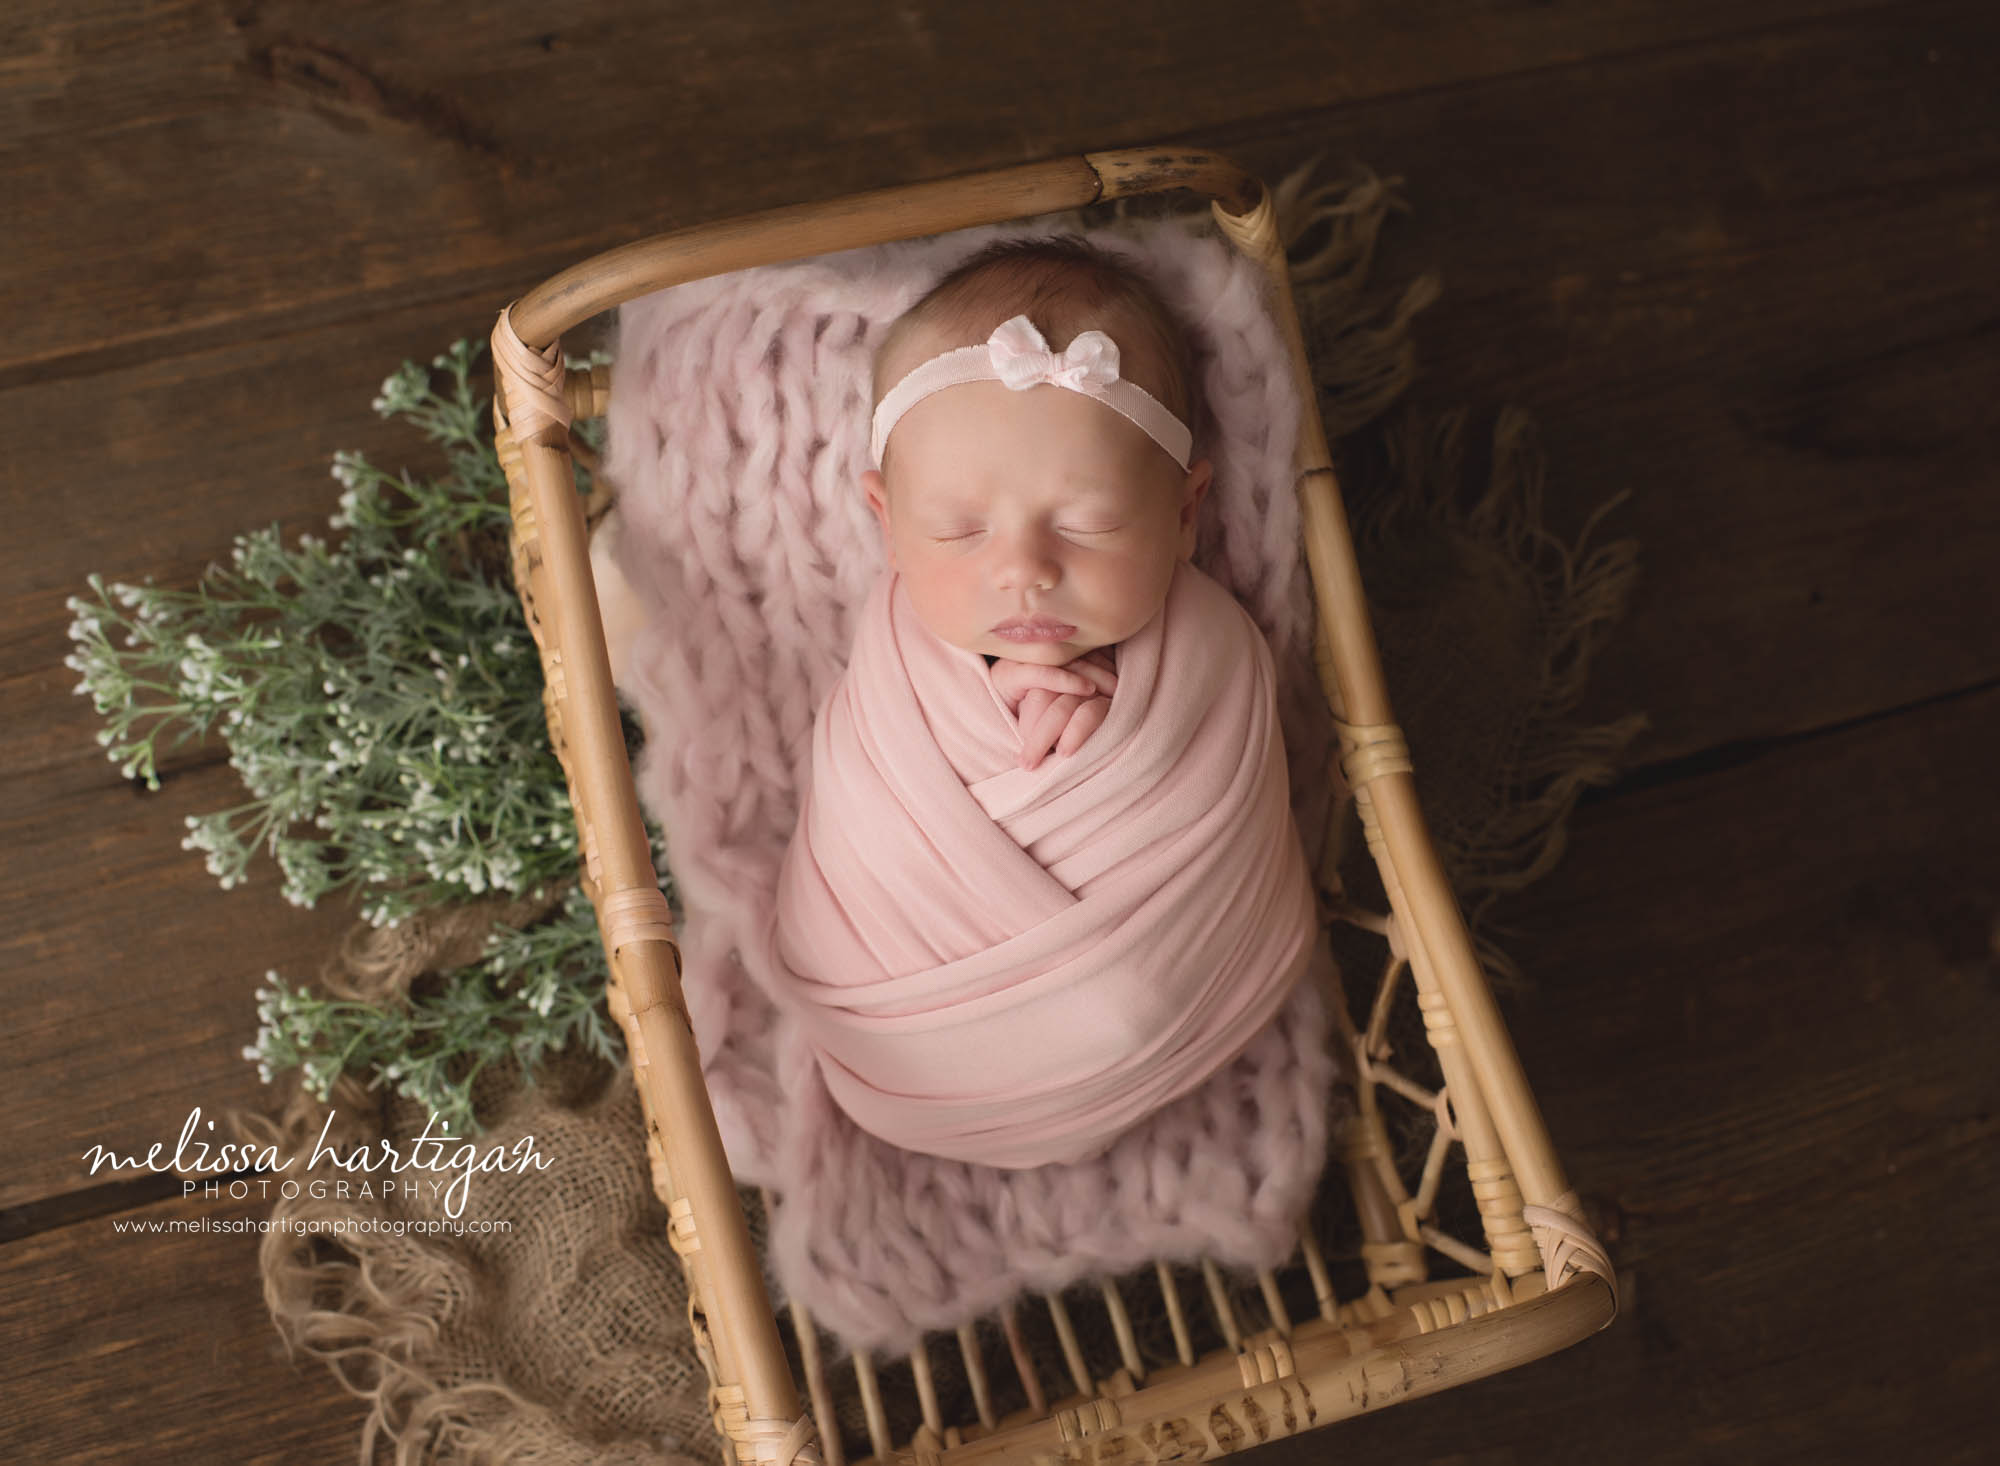 newborn baby girl wrapped in light pink wrap with matching pink bow headband posed in basket with green foilage hartford county newborn baby photographer